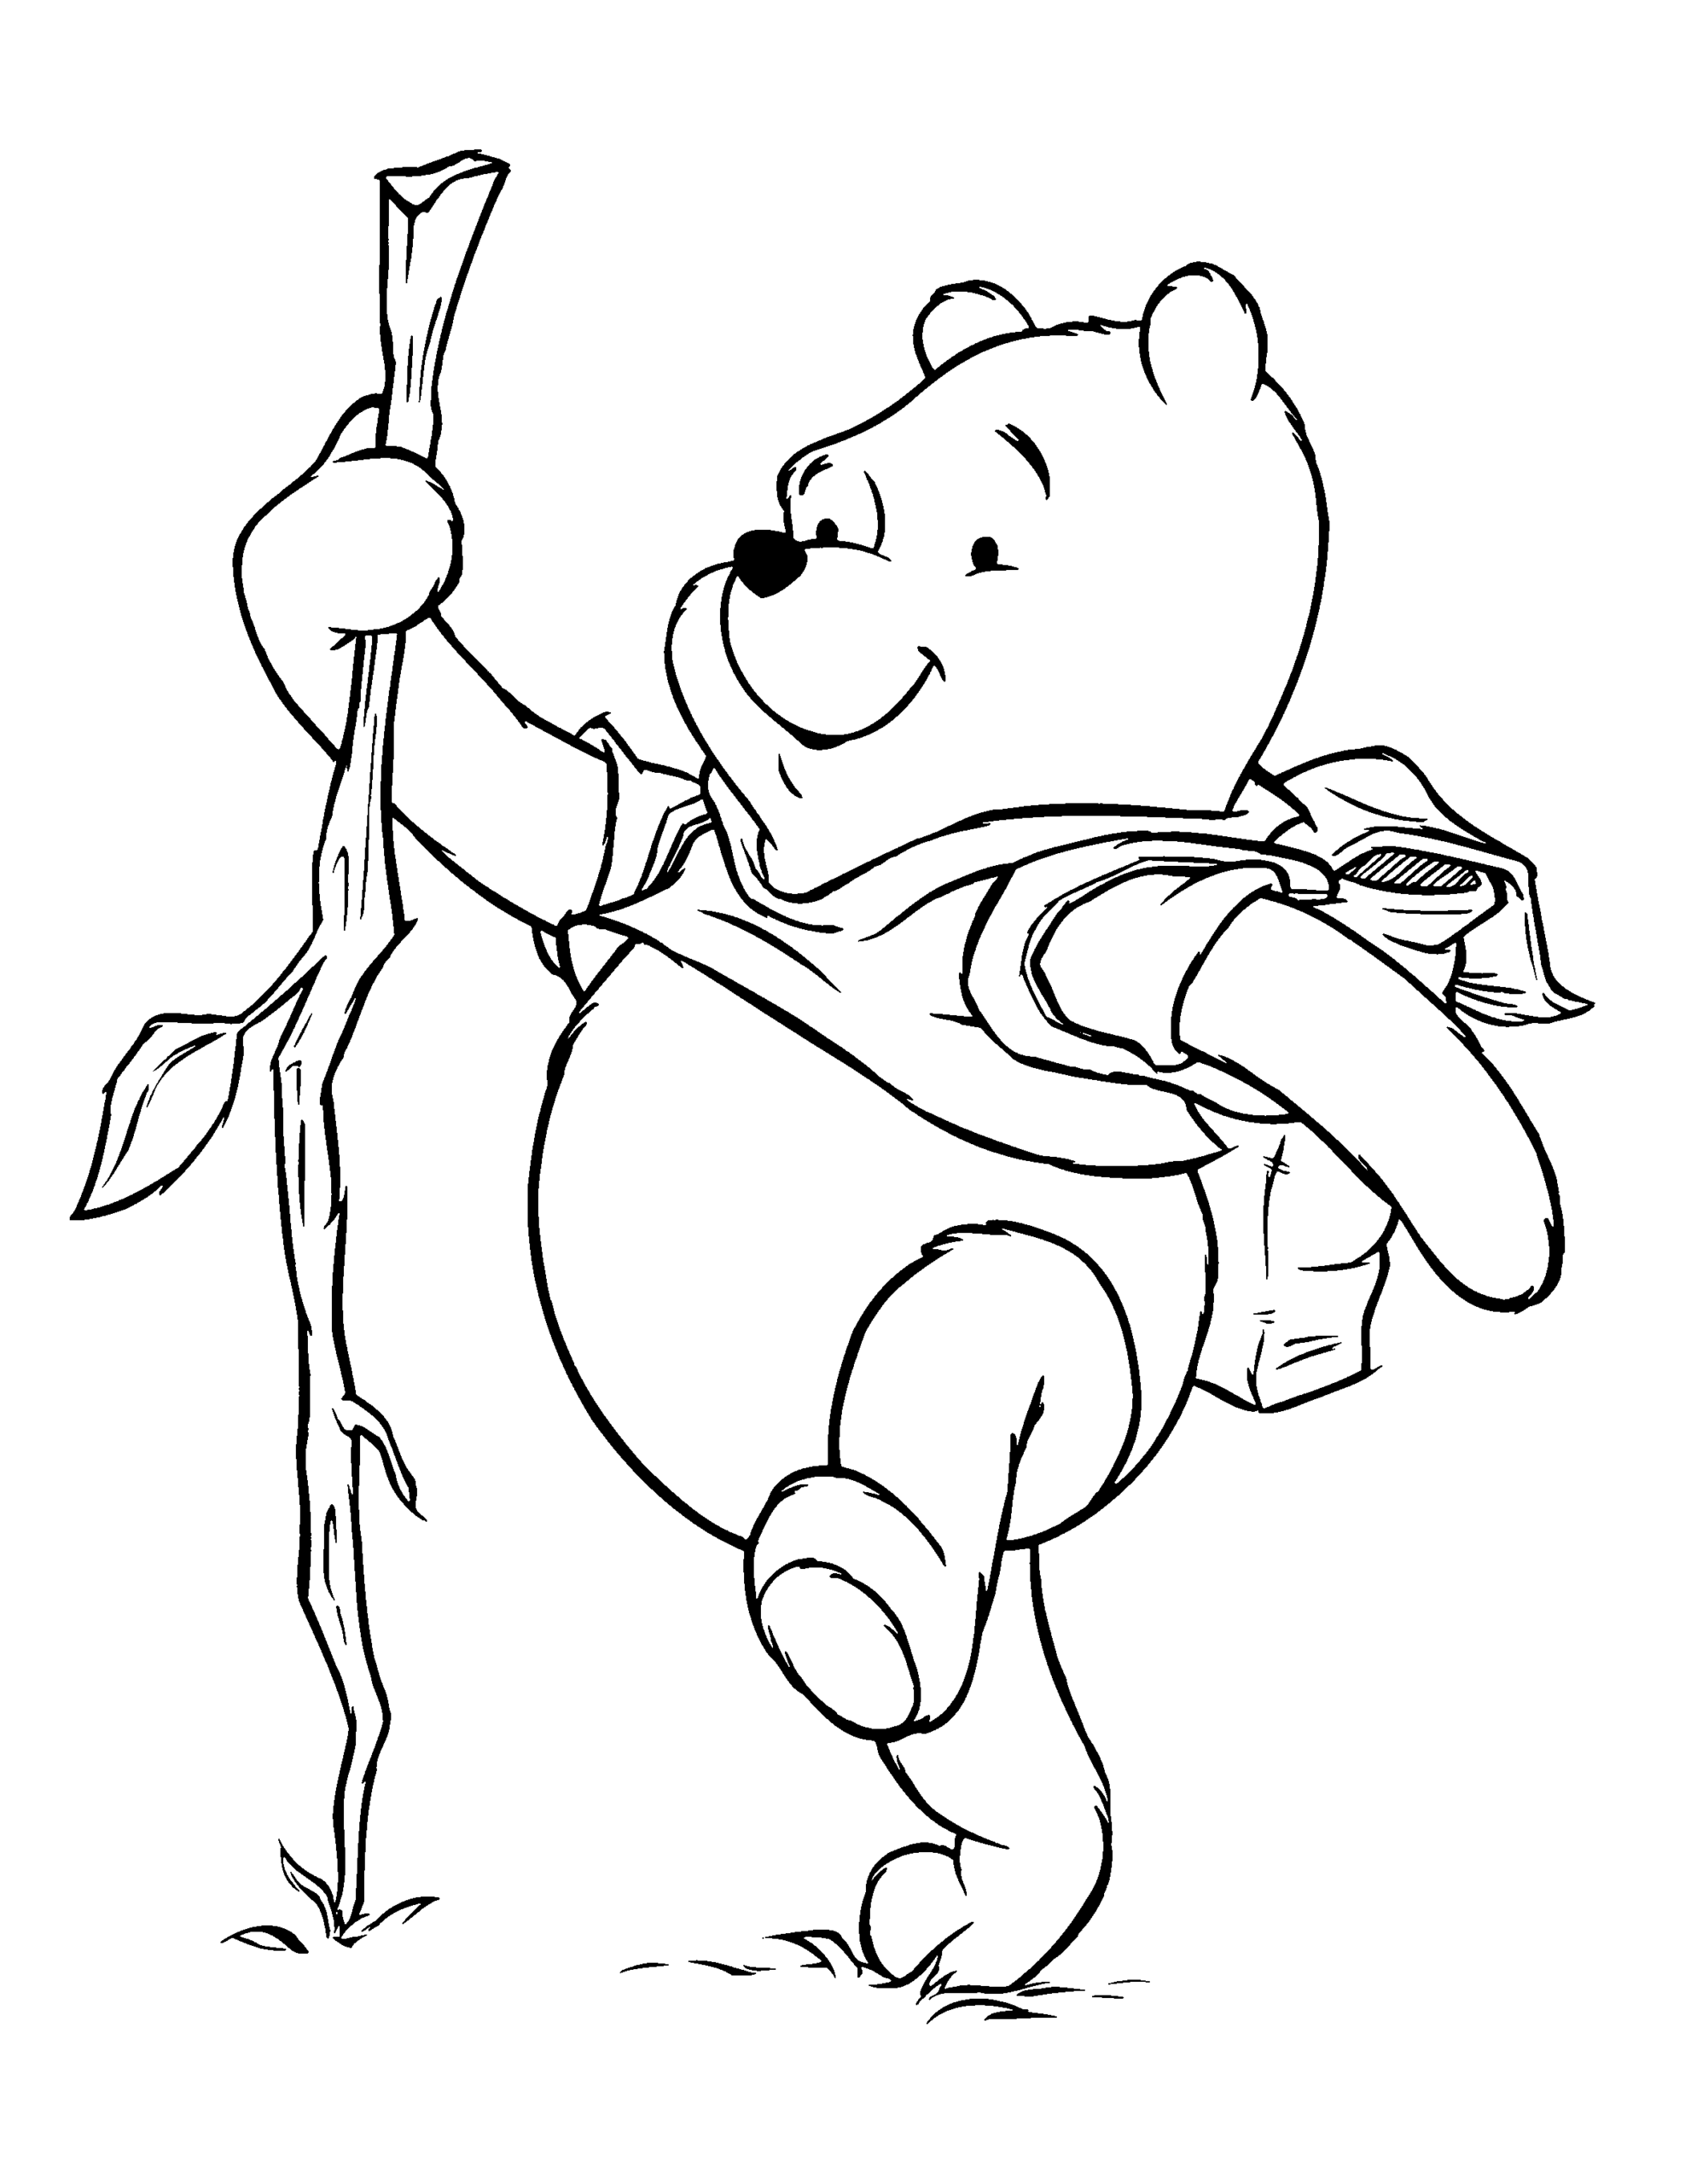 Winnie the Pooh Coloring Pages Cartoons winnie the pooh 48 Printable 2020 7158 Coloring4free